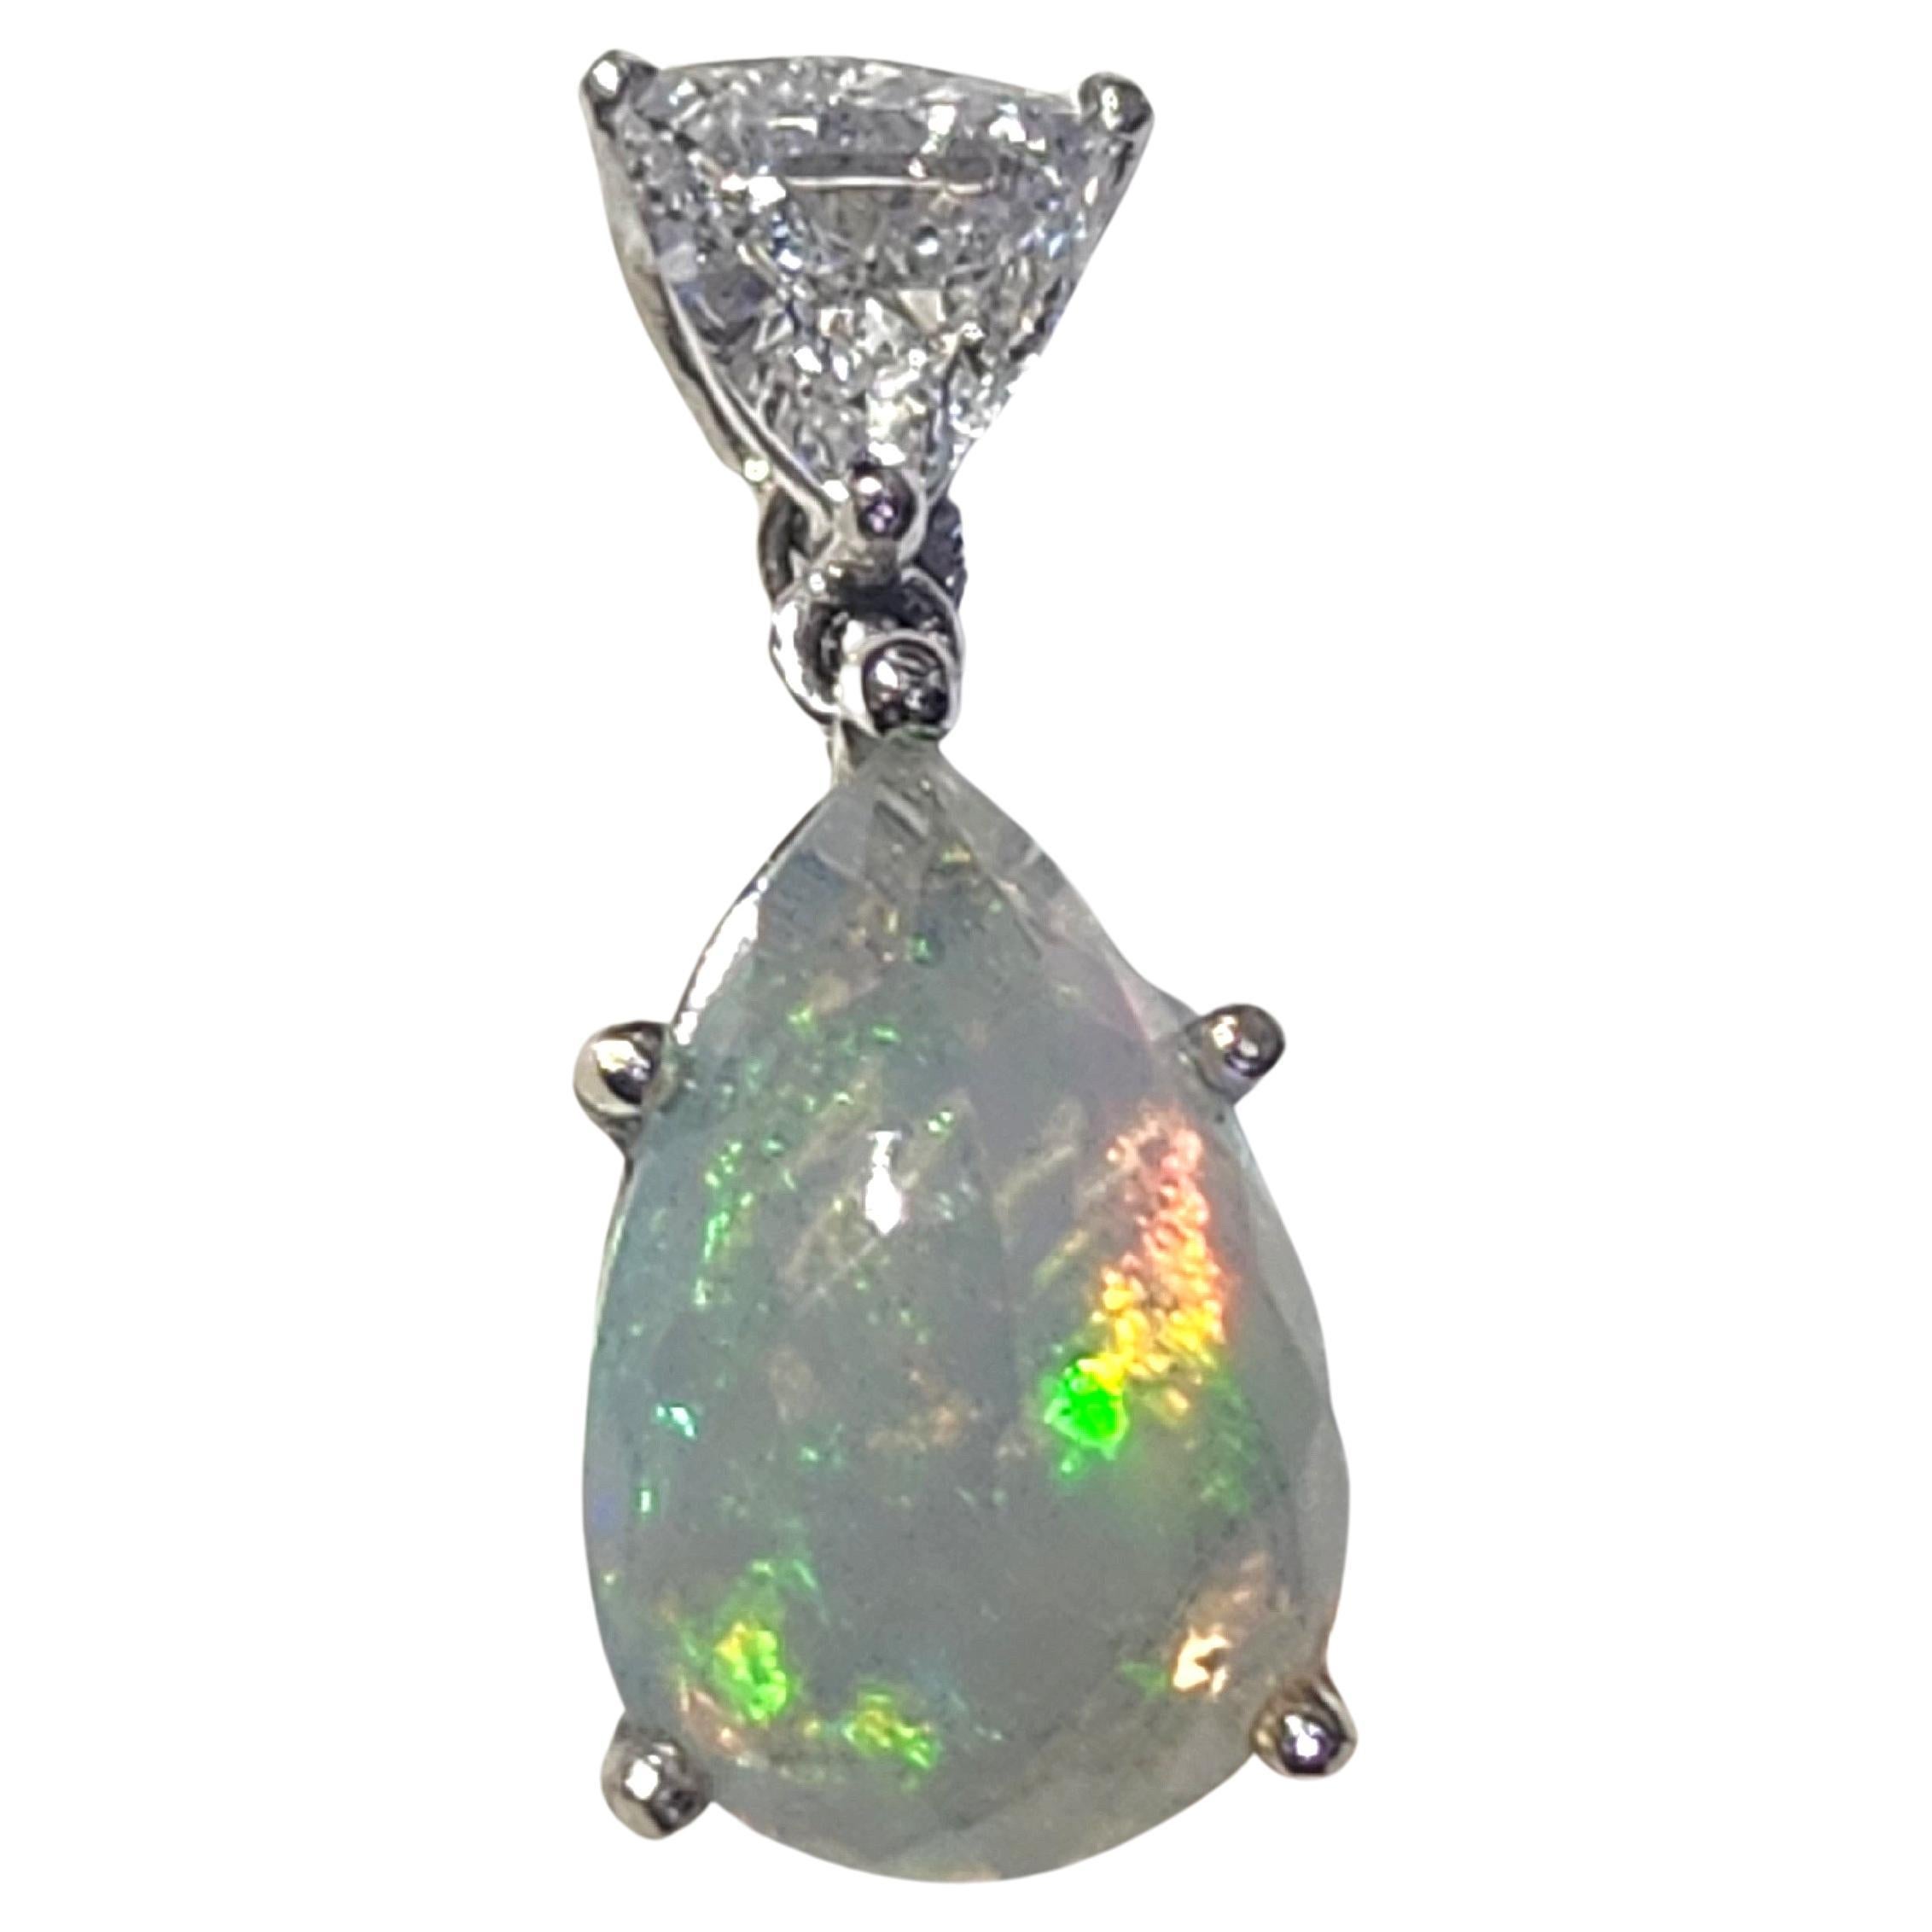 Natural fire opal stone pendant in 18k white gold topped with triangular brilliant cut Diamond F color white si clearity 0.65 carats weight GIA certified pendant made in france hall marked with eagle head french assay mark 